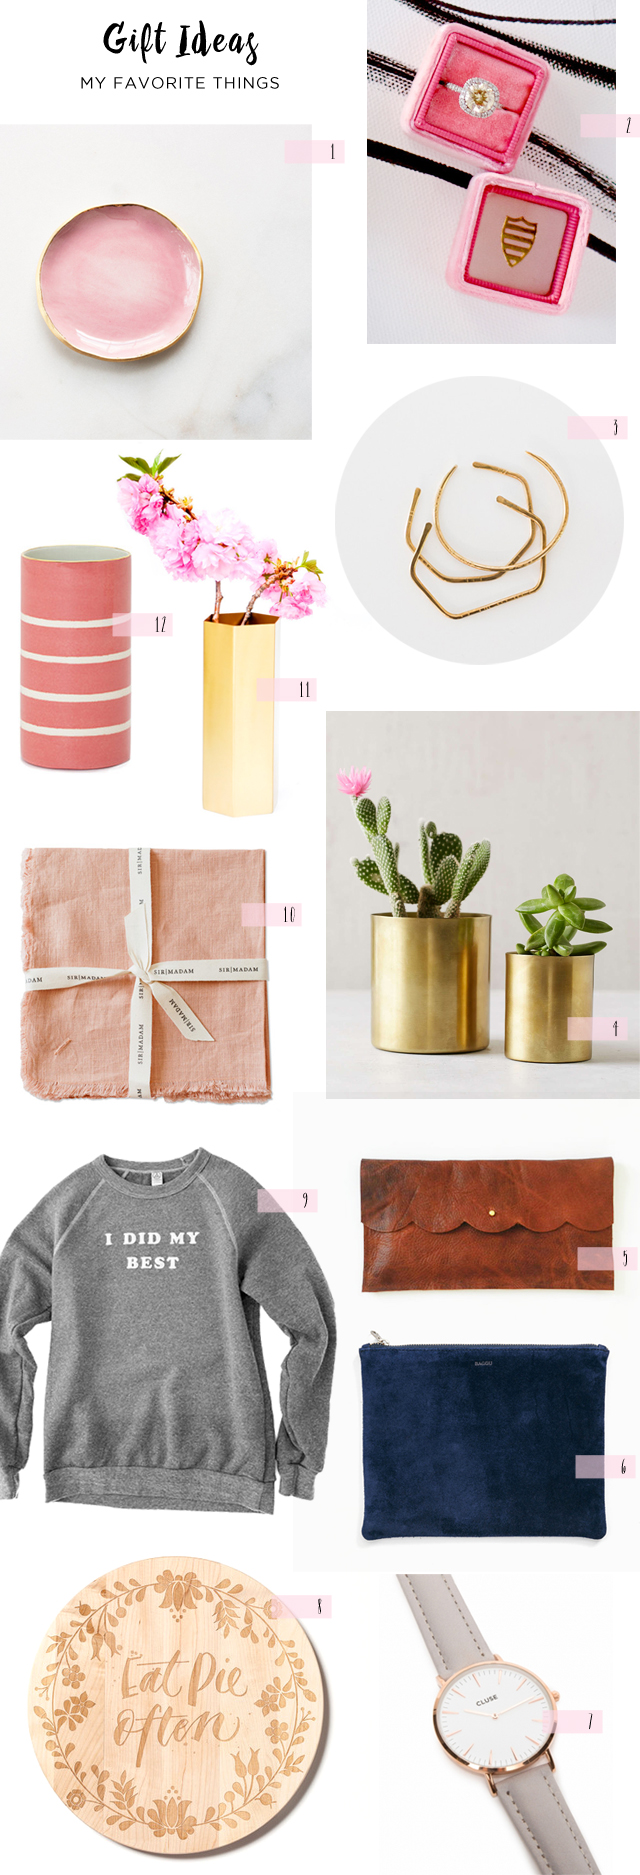 2015 Gift Guide: Favorite Things / Oh So Beautiful Paper